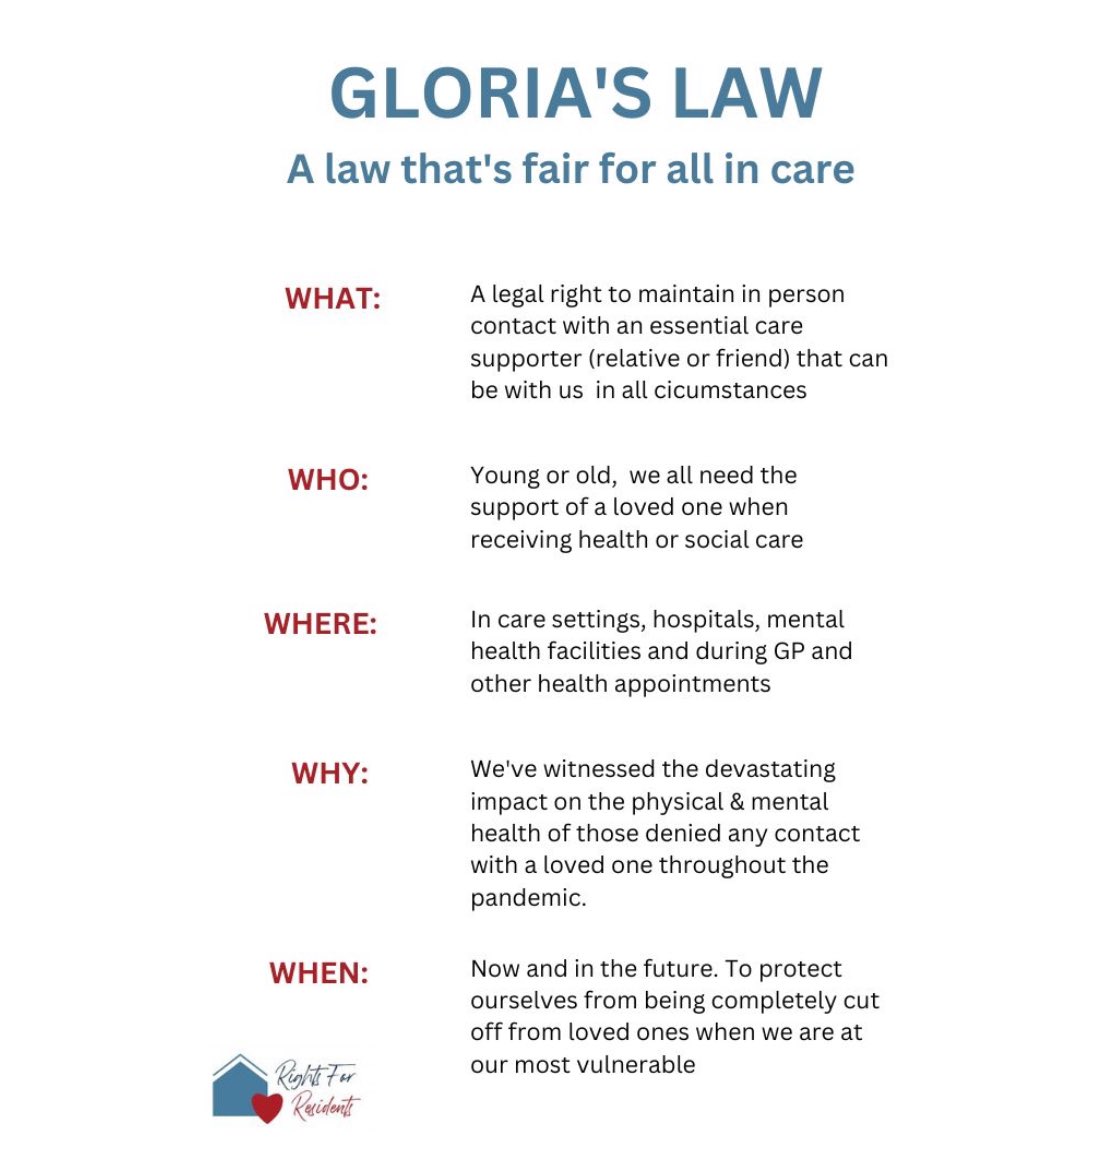 With a #GeneralElection now upon us we will be increasing our call for #GloriasLaw, a legal right to a #CareSupporter. We have cross party support & the support of 79 organisations - so our question to all candidates, will you support us? #RightsForResidents